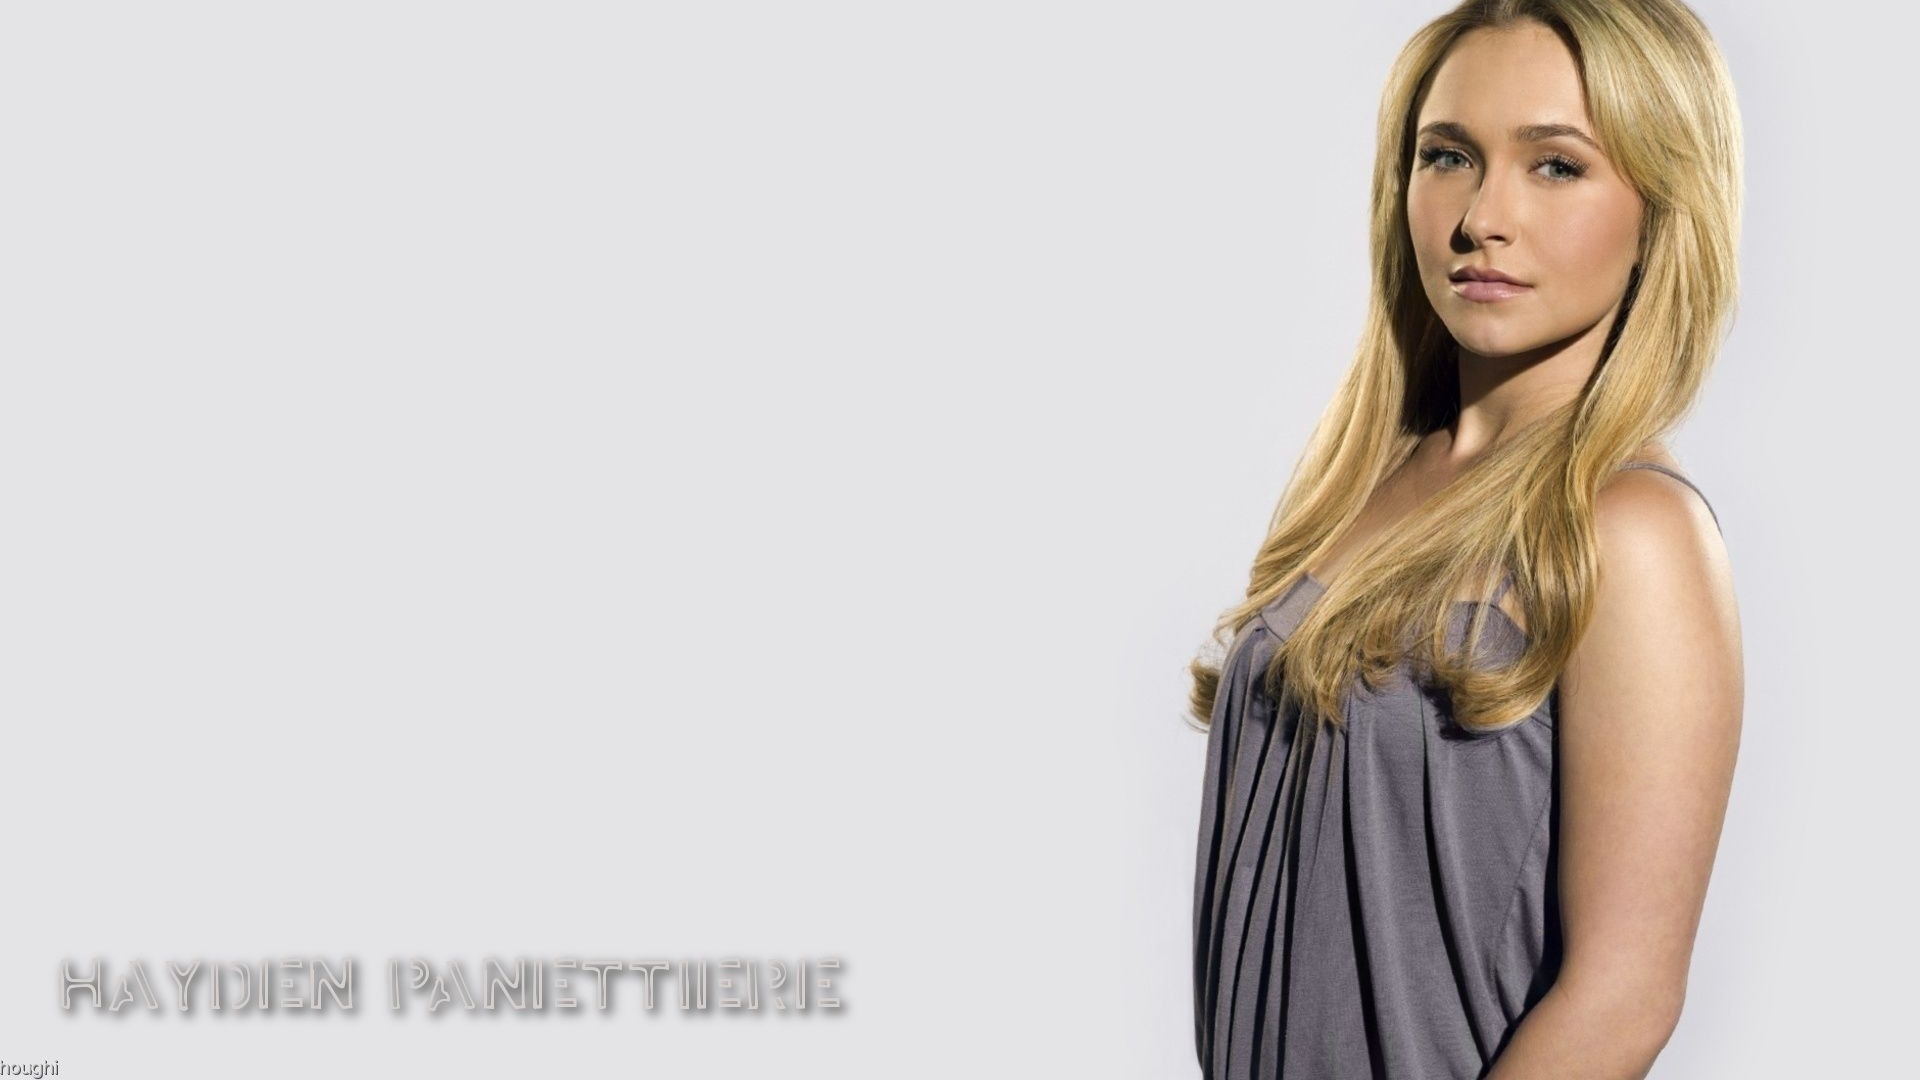 Hayden Panettiere #004 - 1920x1080 Wallpapers Pictures Photos Images